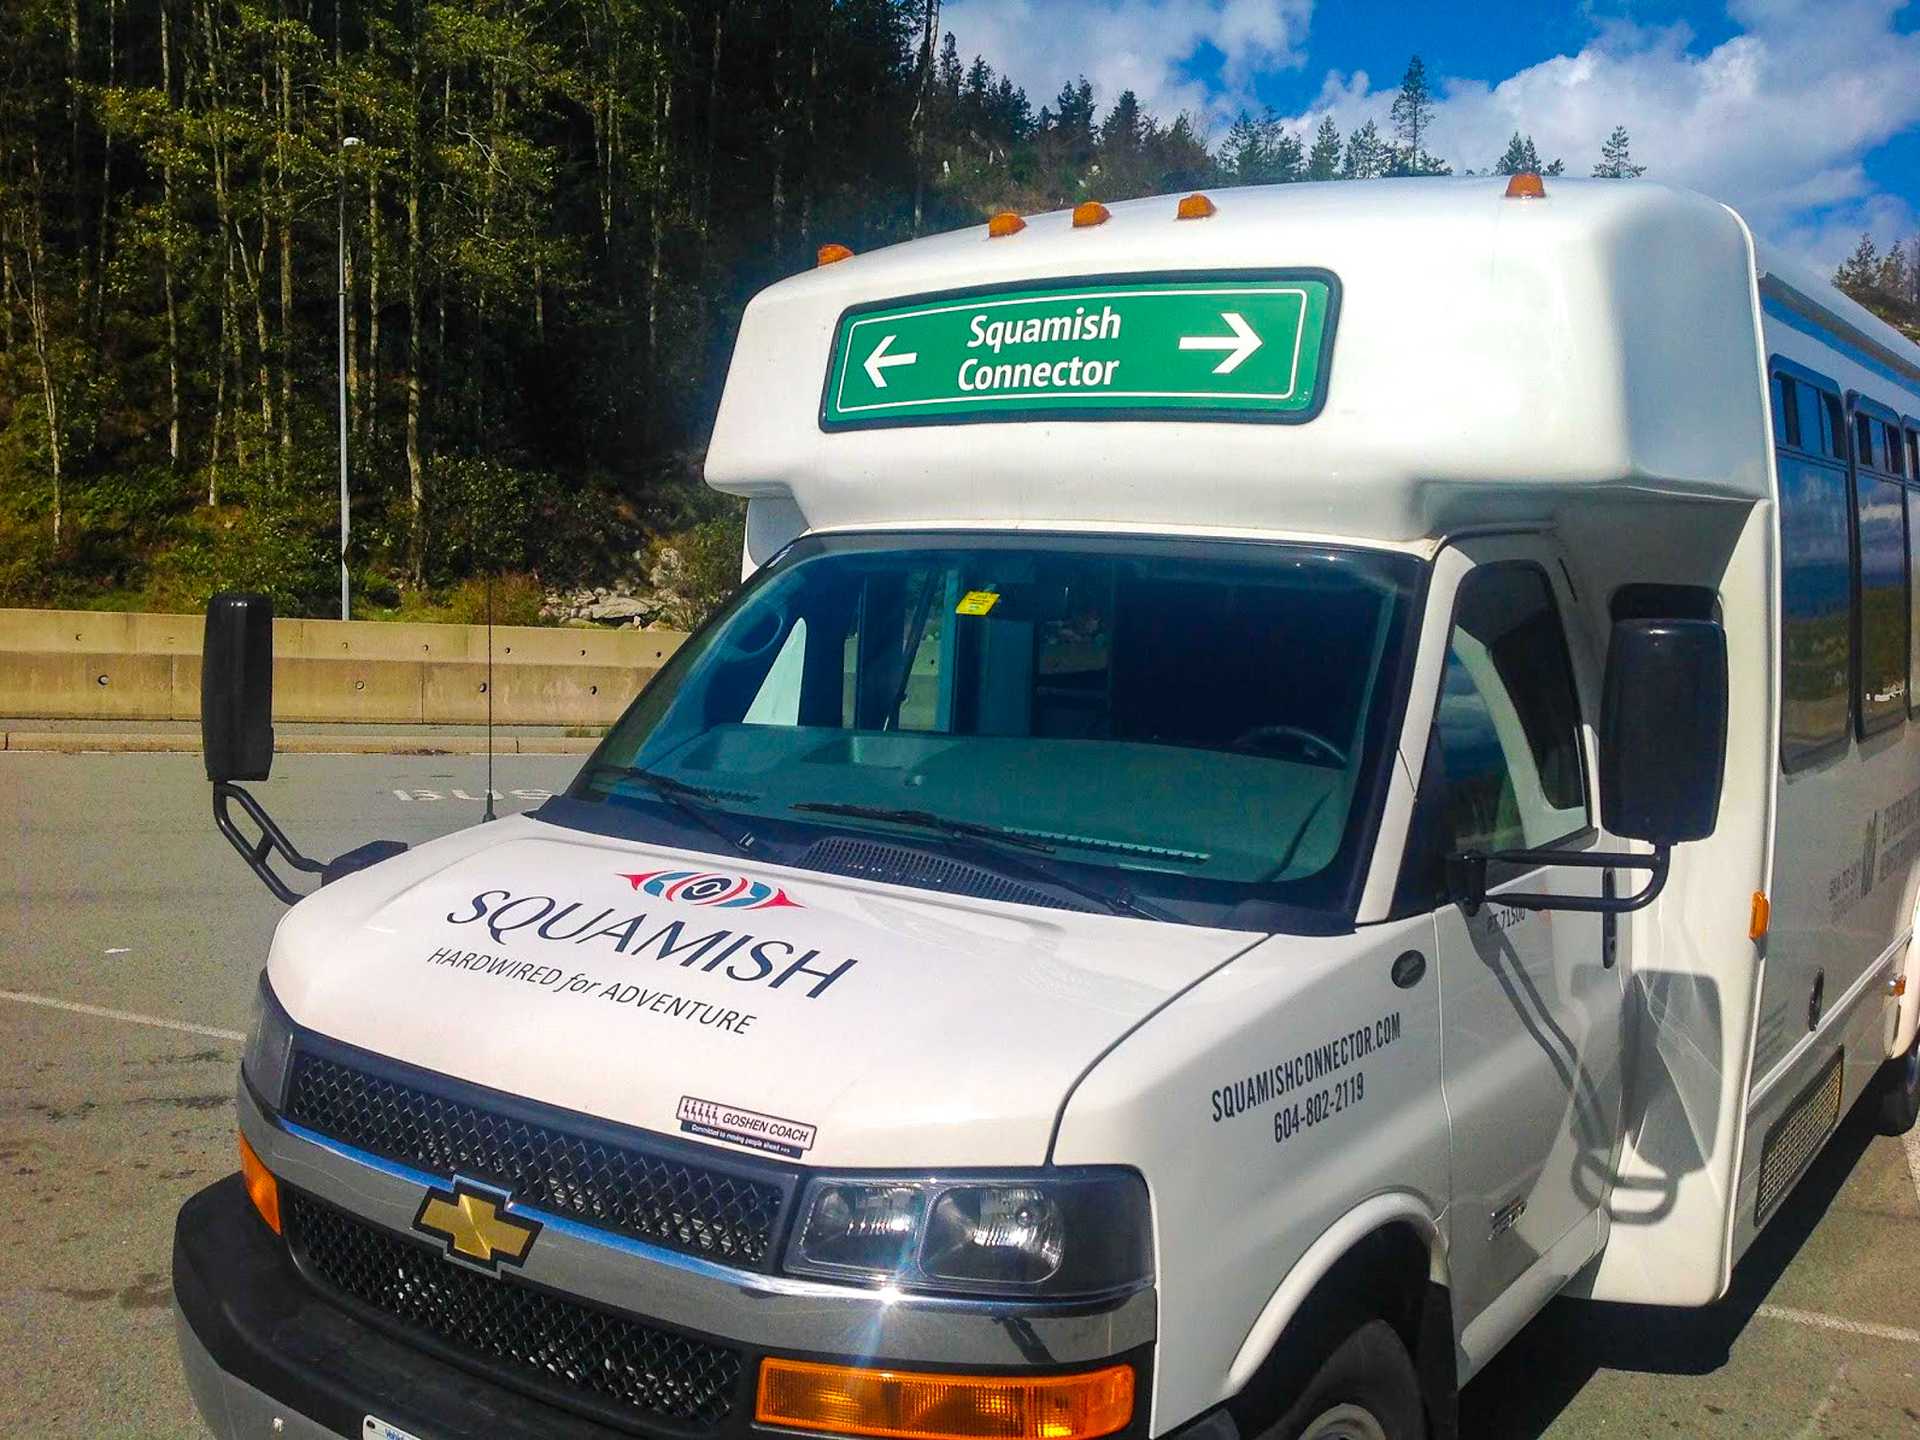 Bus operated by Squamish Connector